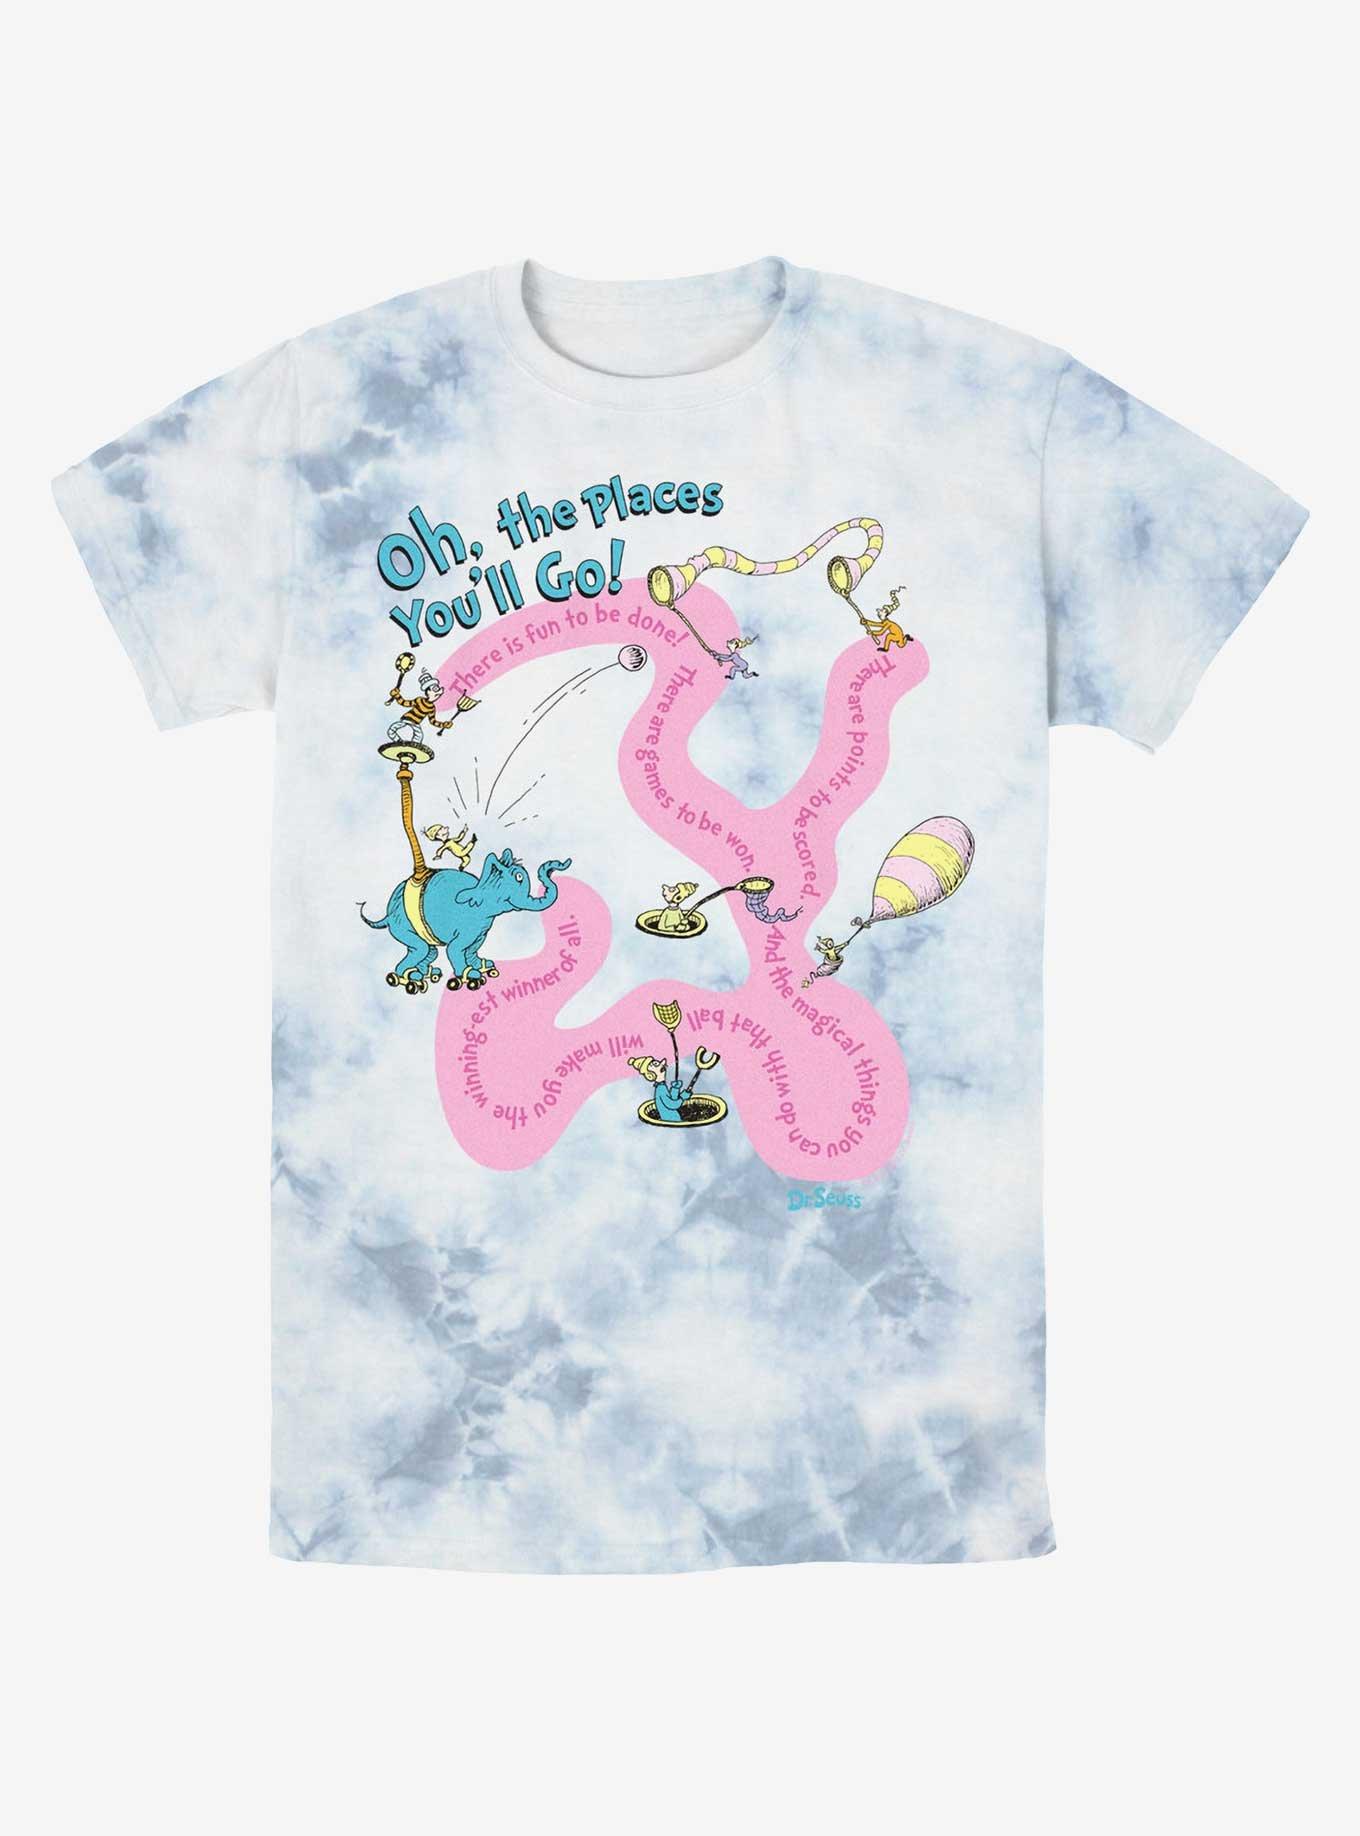 Dr. Seuss Journeying The Places You'Ll Go Tie-Dye T-Shirt